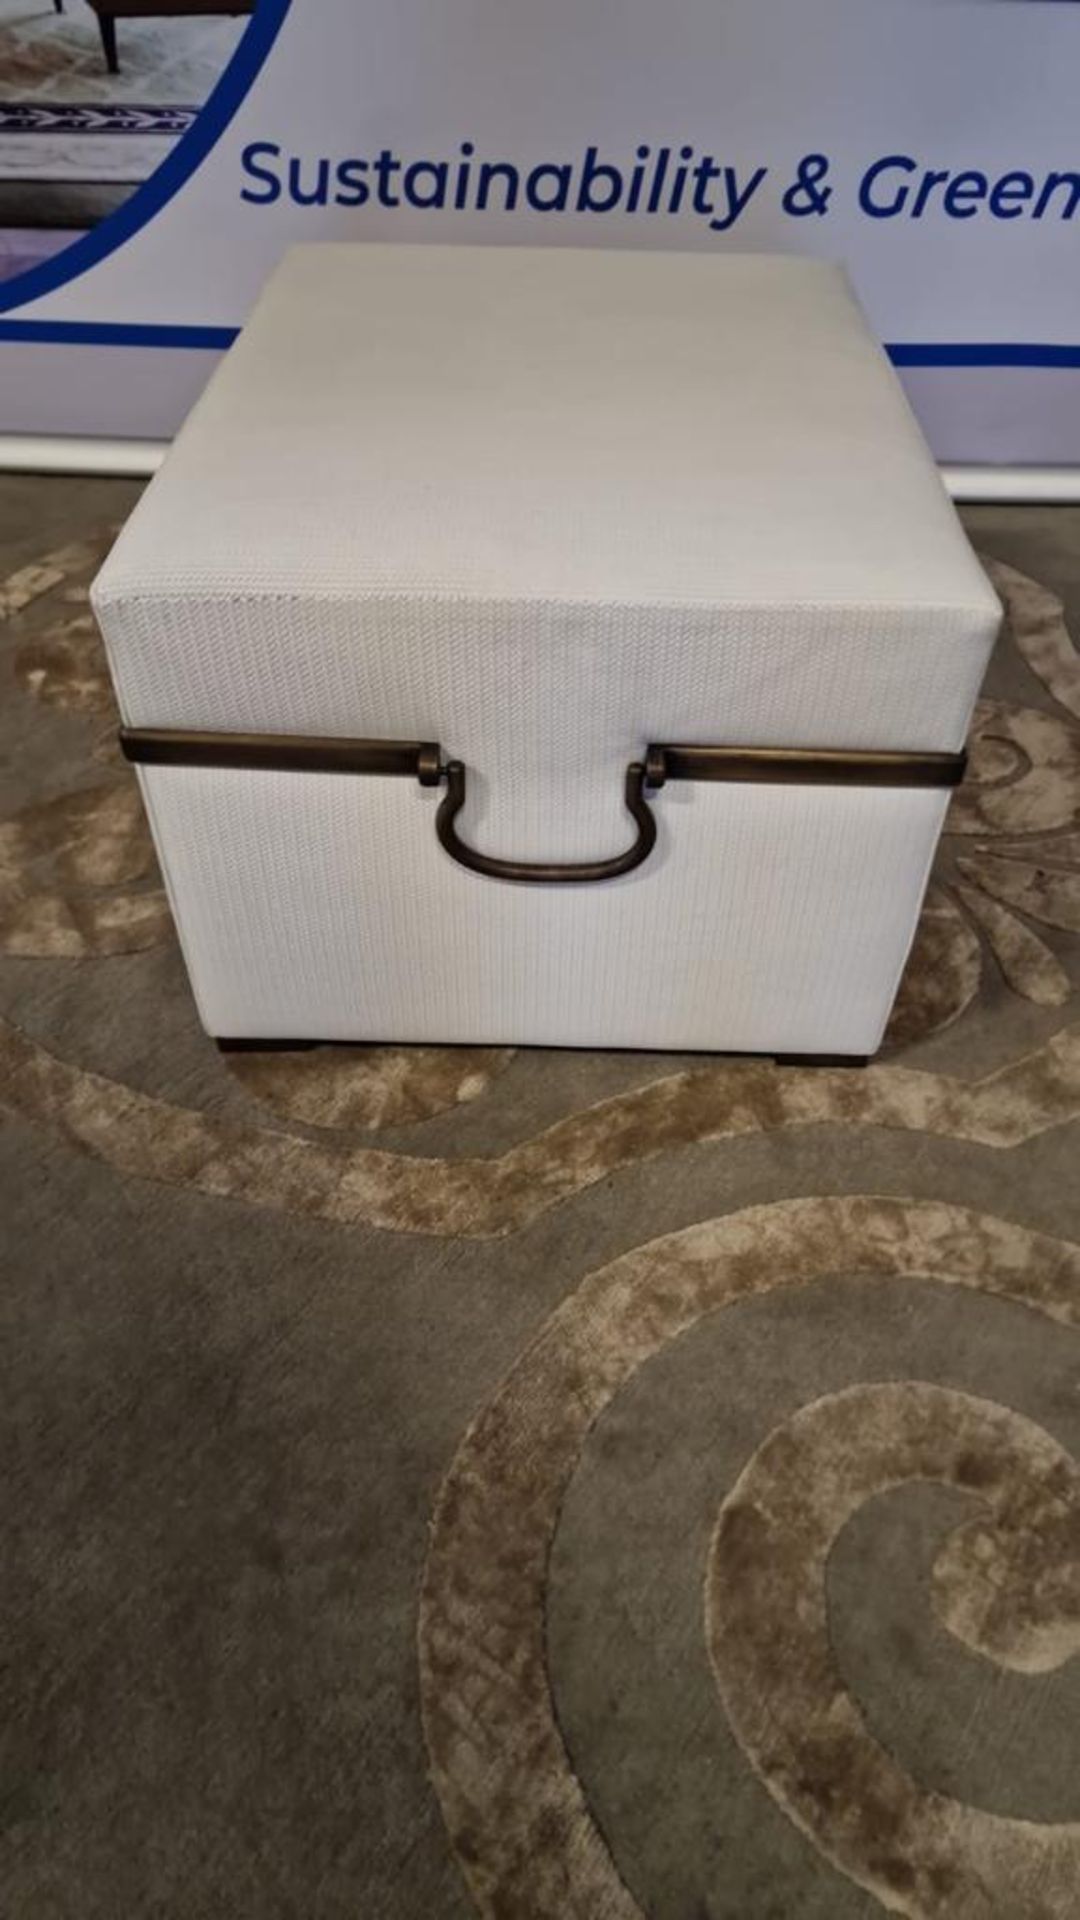 A bespoke ottoman made by George Smith Ltd in a cream patterned fabric with bronze strap details and - Image 2 of 3